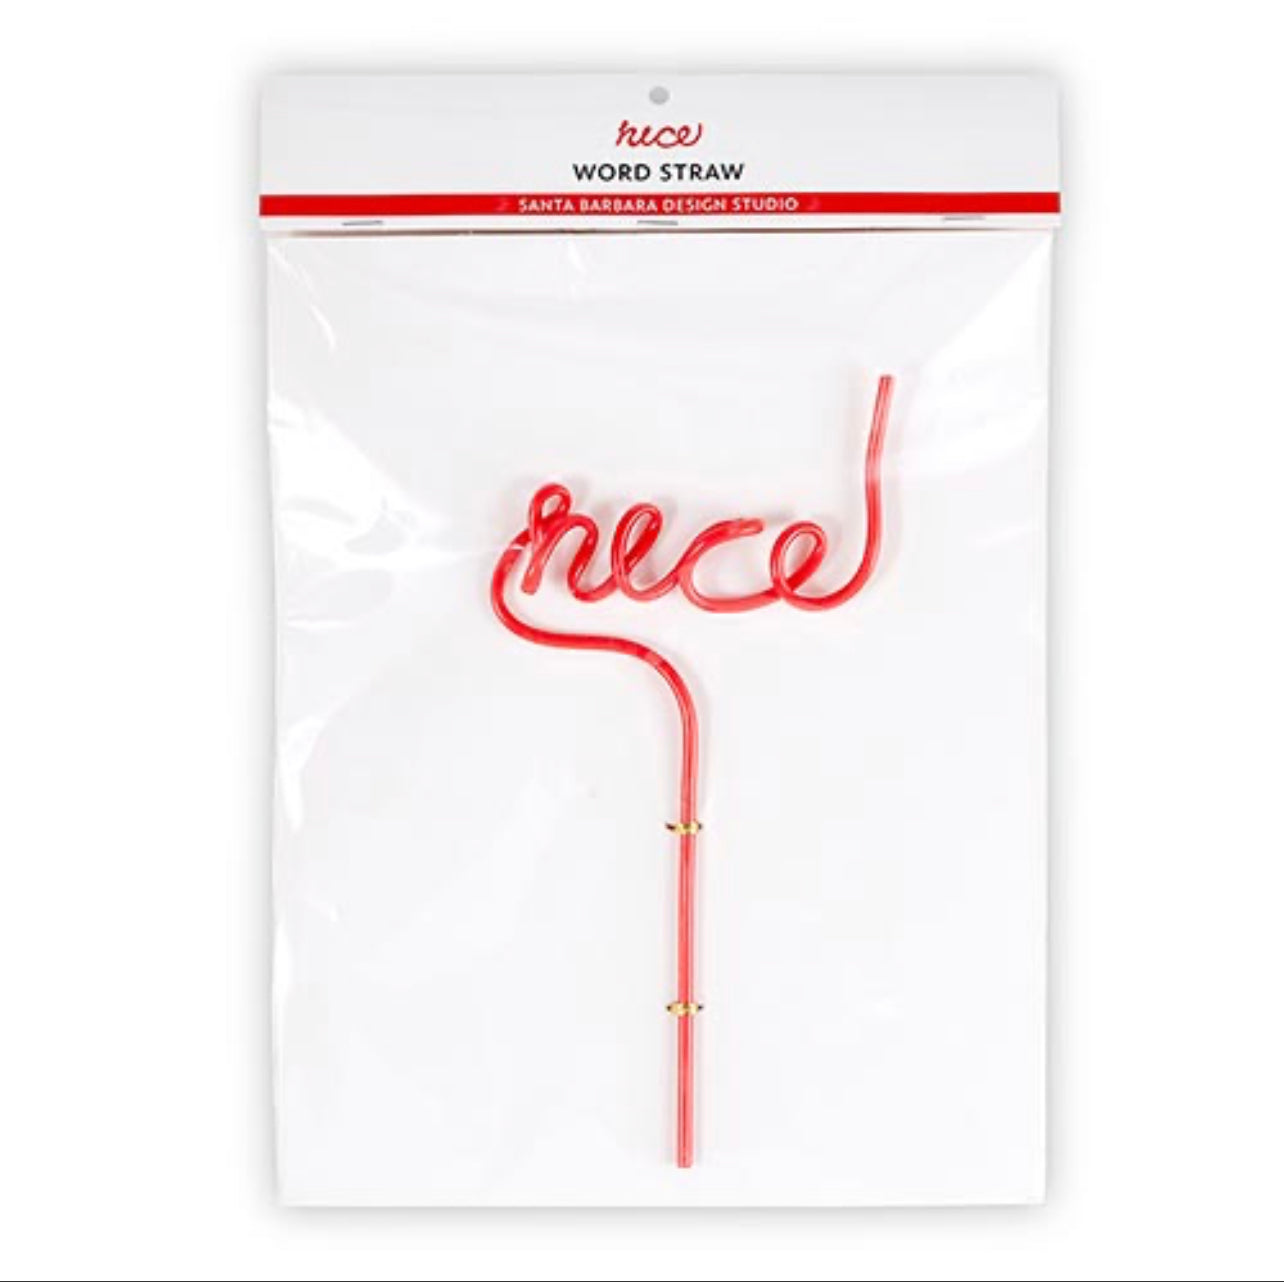 the "nice" word straw comes in a festive red and white package